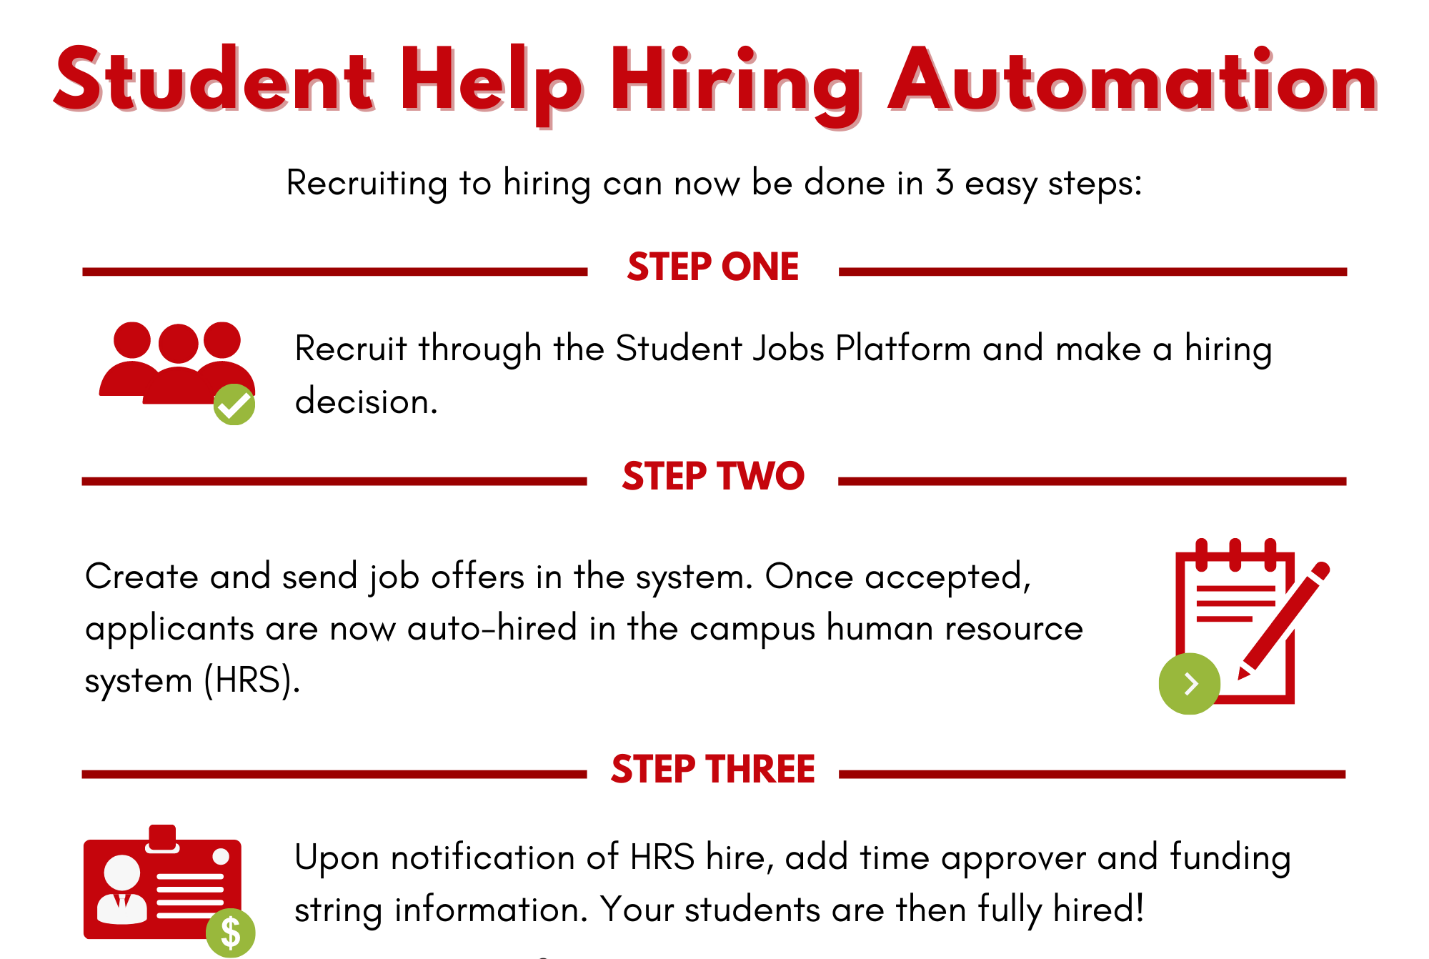 Recruiting to hiring can now be done in 3 easy steps: Recruit through the Student Jobs Platform and make a hiring decision, Create and send job offers in the system, and add time approver and funding string information upon notification of HRS hire.